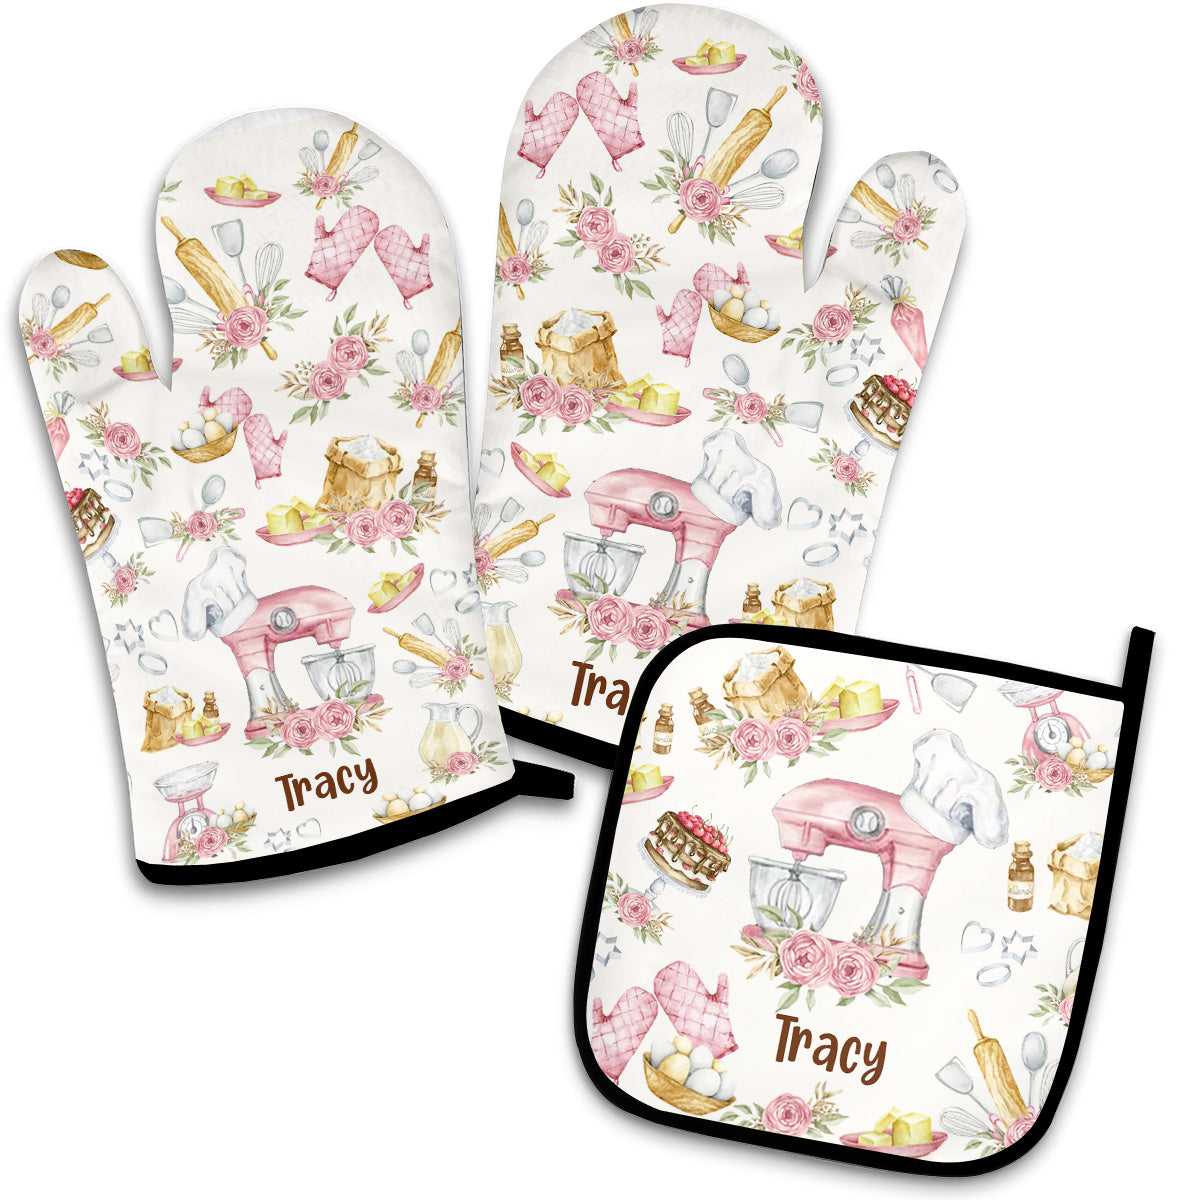 Baking Is My Therapy - Personalized Baking Oven Mitts & Pot Holder